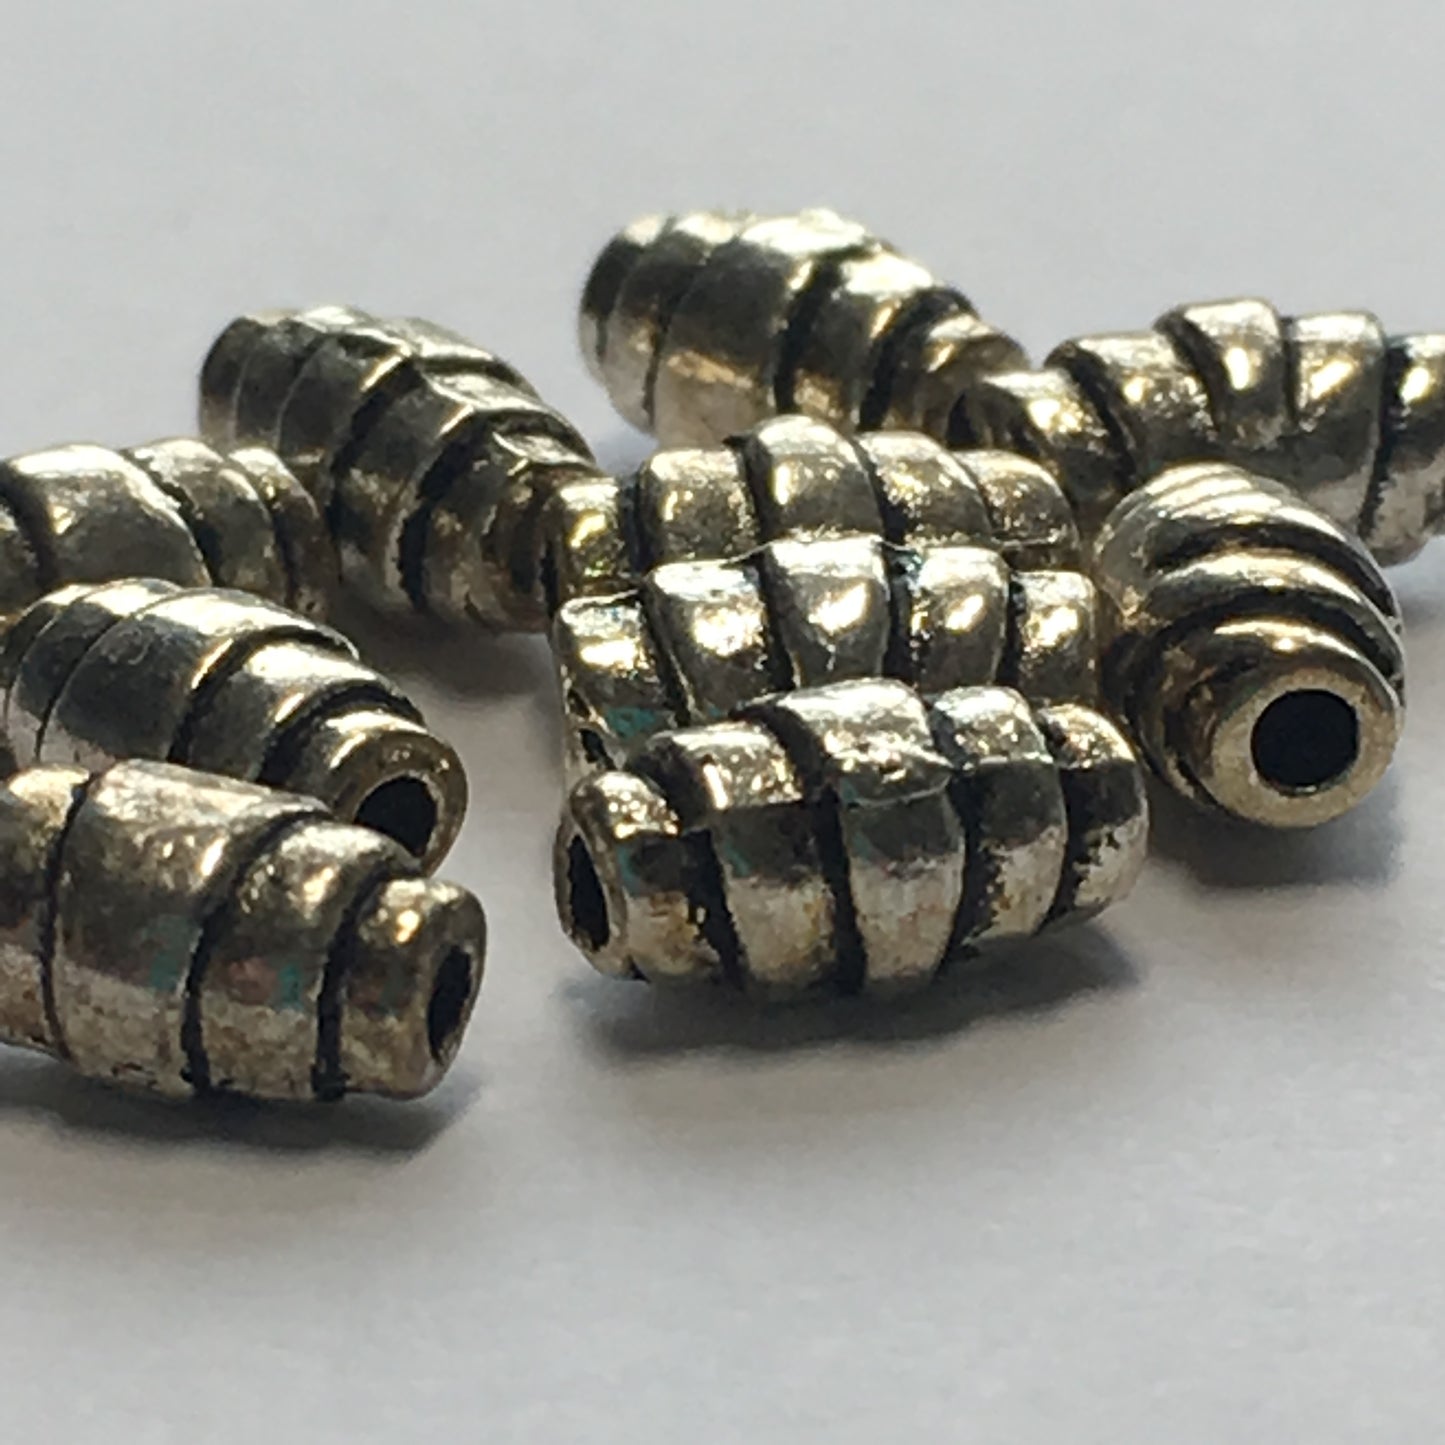 Antique Silver Crescent Roll Beads, 8 x 4 mm - 5 or 10 Beads